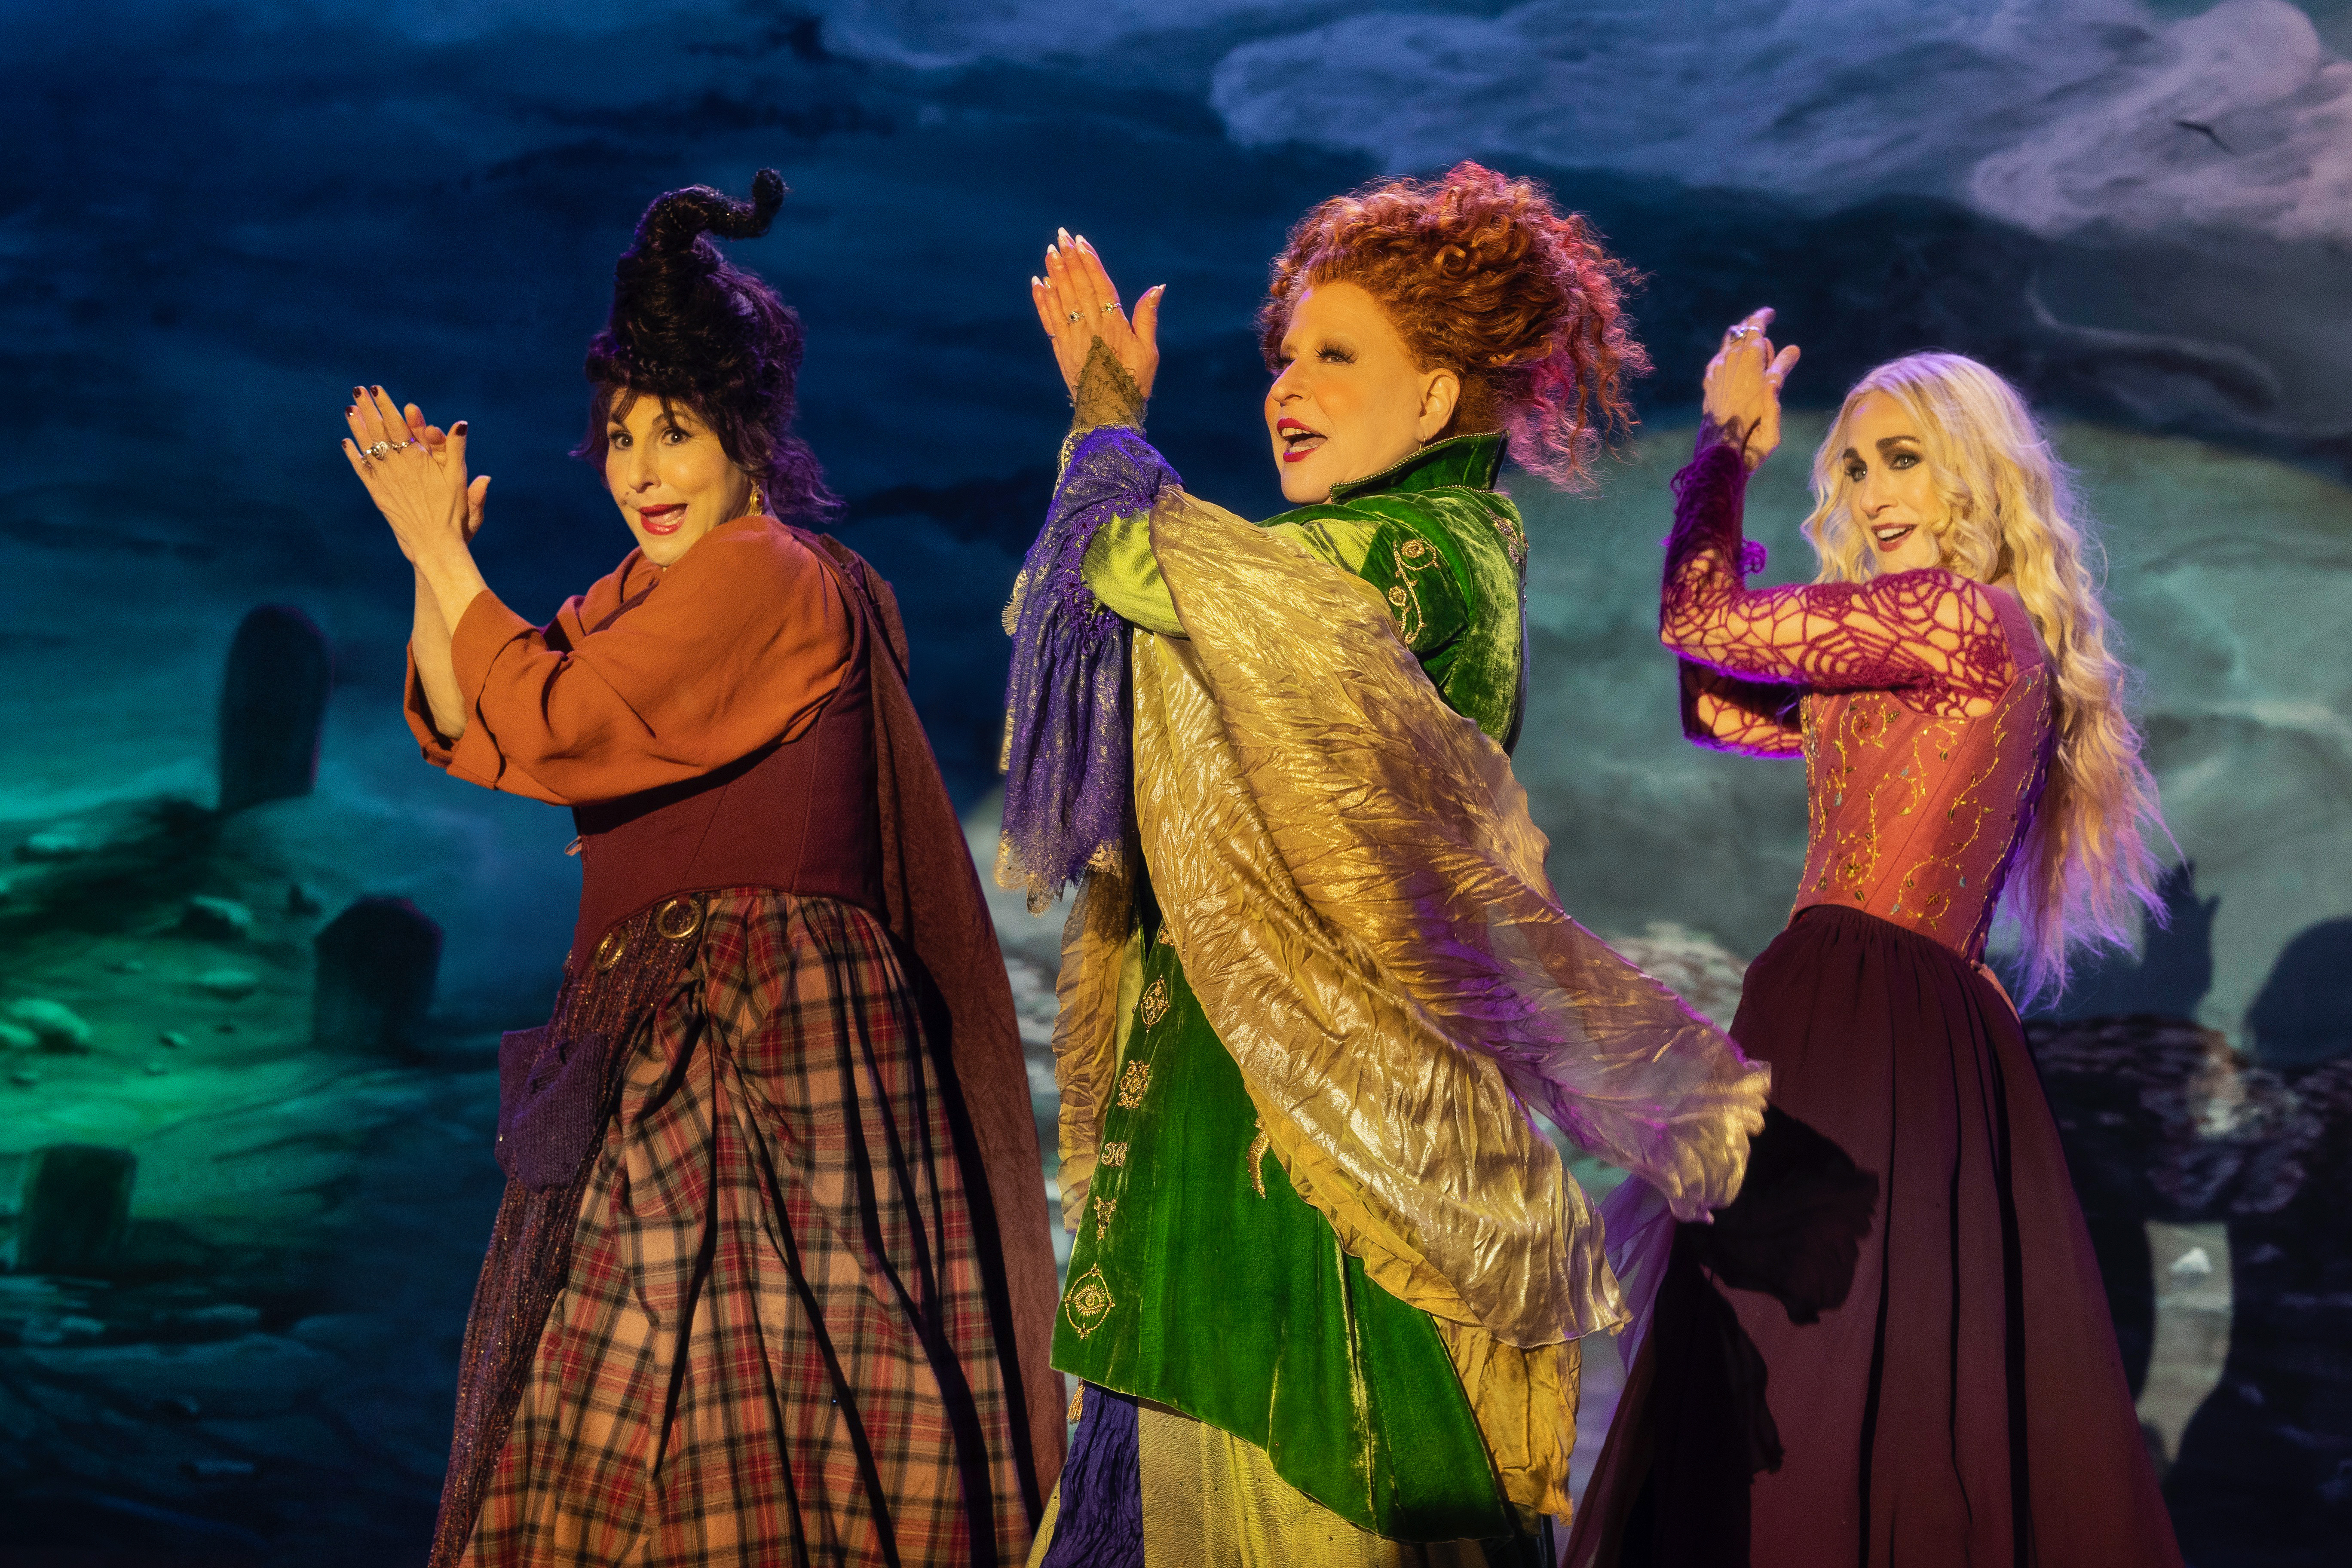 (L-R): Kathy Najimy as Mary Sanderson, Bette Midler as Winifred Sanderson, and Sarah Jessica Parker as Sarah Sanderson in HOCUS POCUS 2, exclusively on Disney+. Photo by Matt Kennedy. © 2022 Disney Enterprises, Inc. All Rights Reserved.